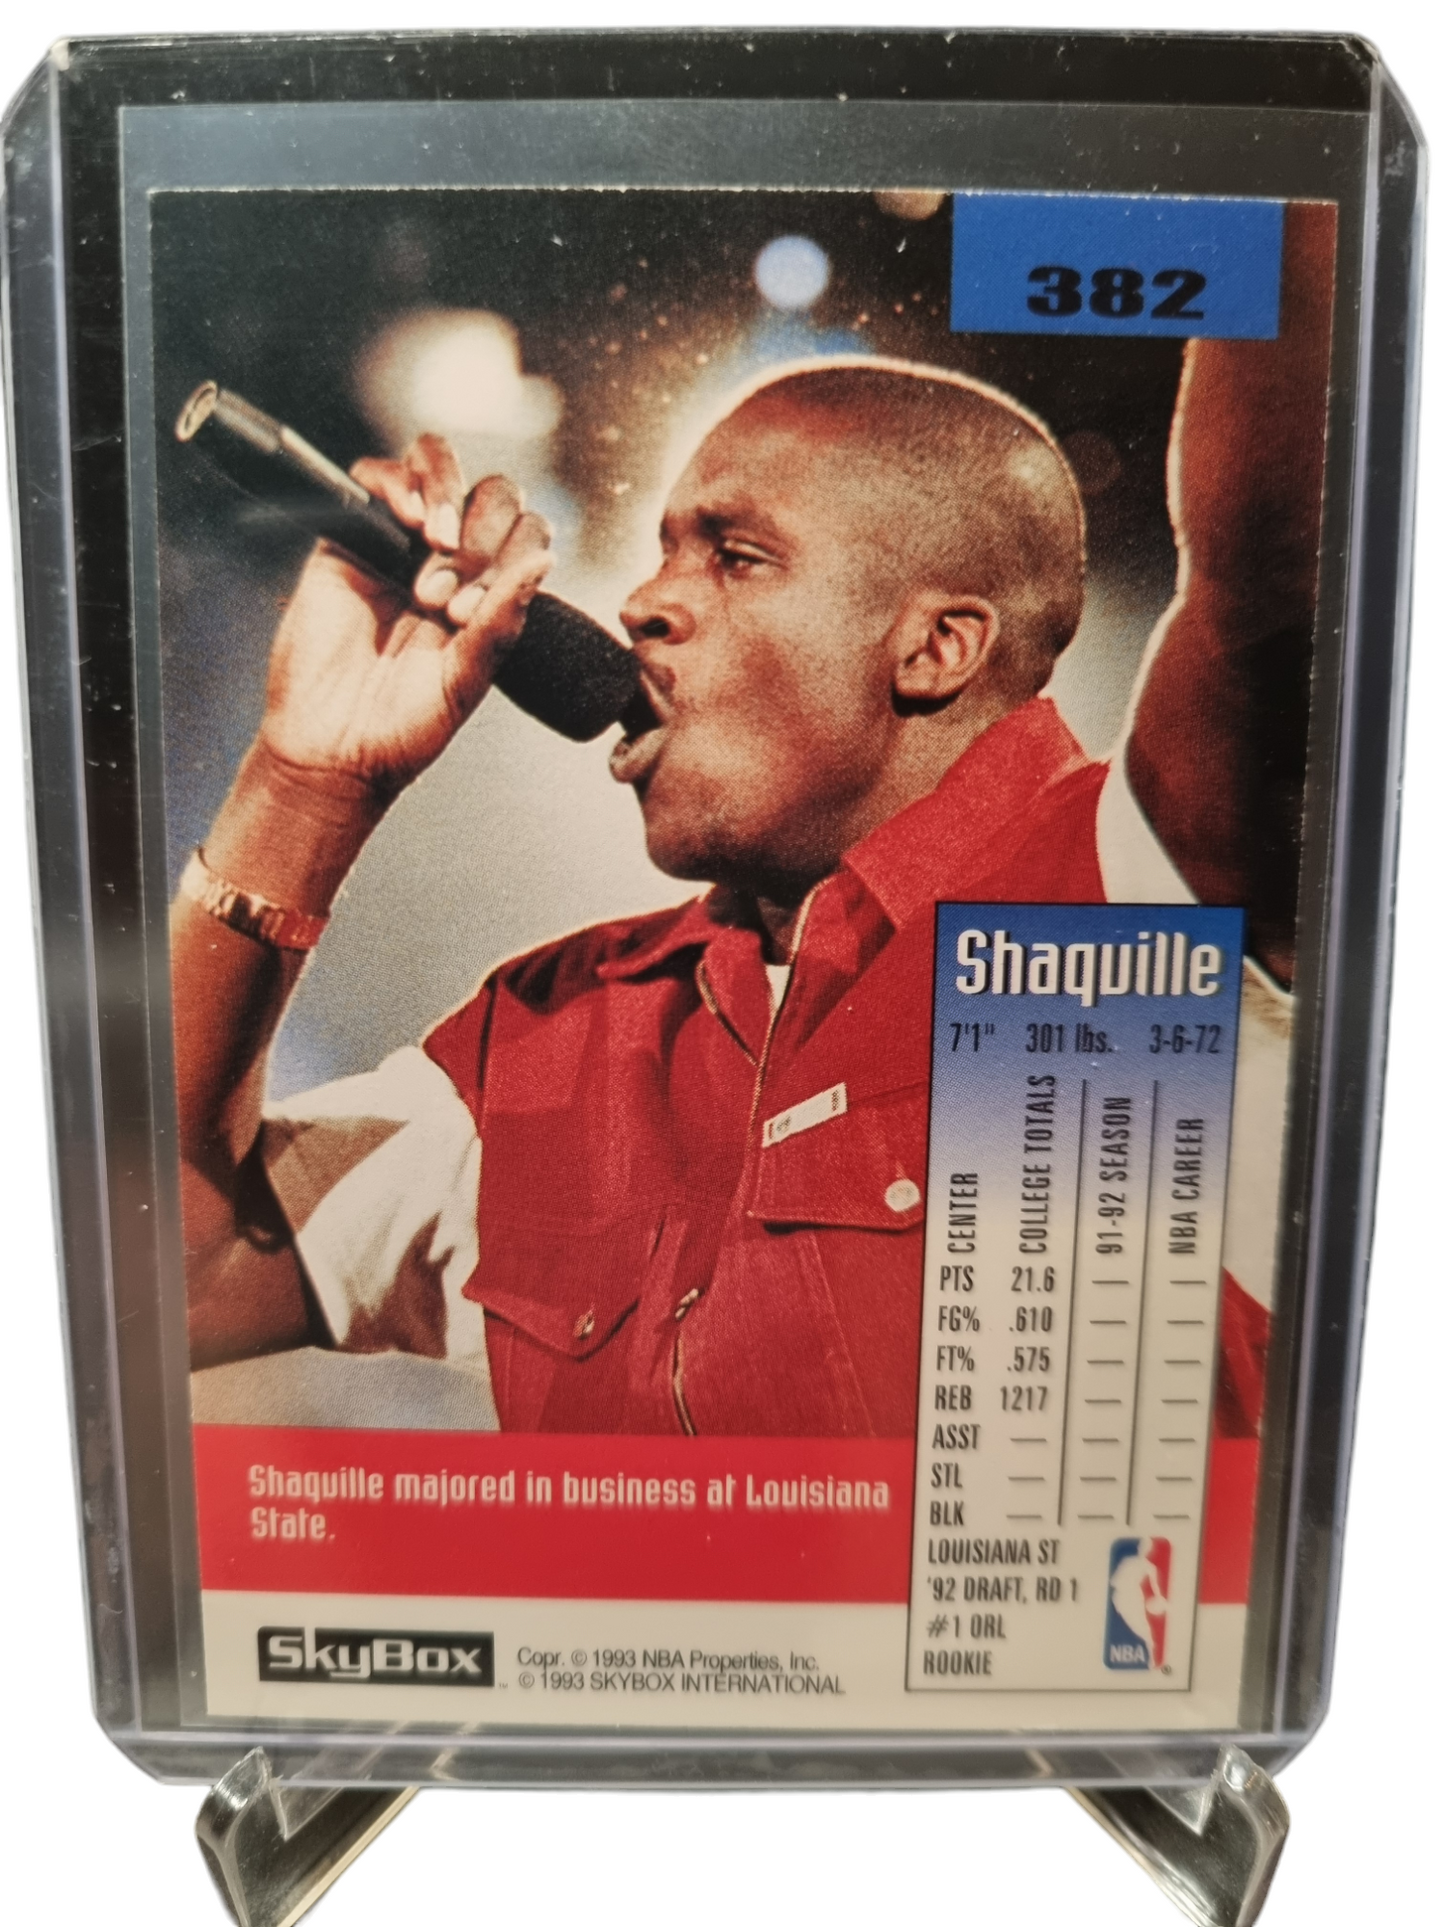 1992-93 Skybox #382 Shaquille O'Neal Rookie Card